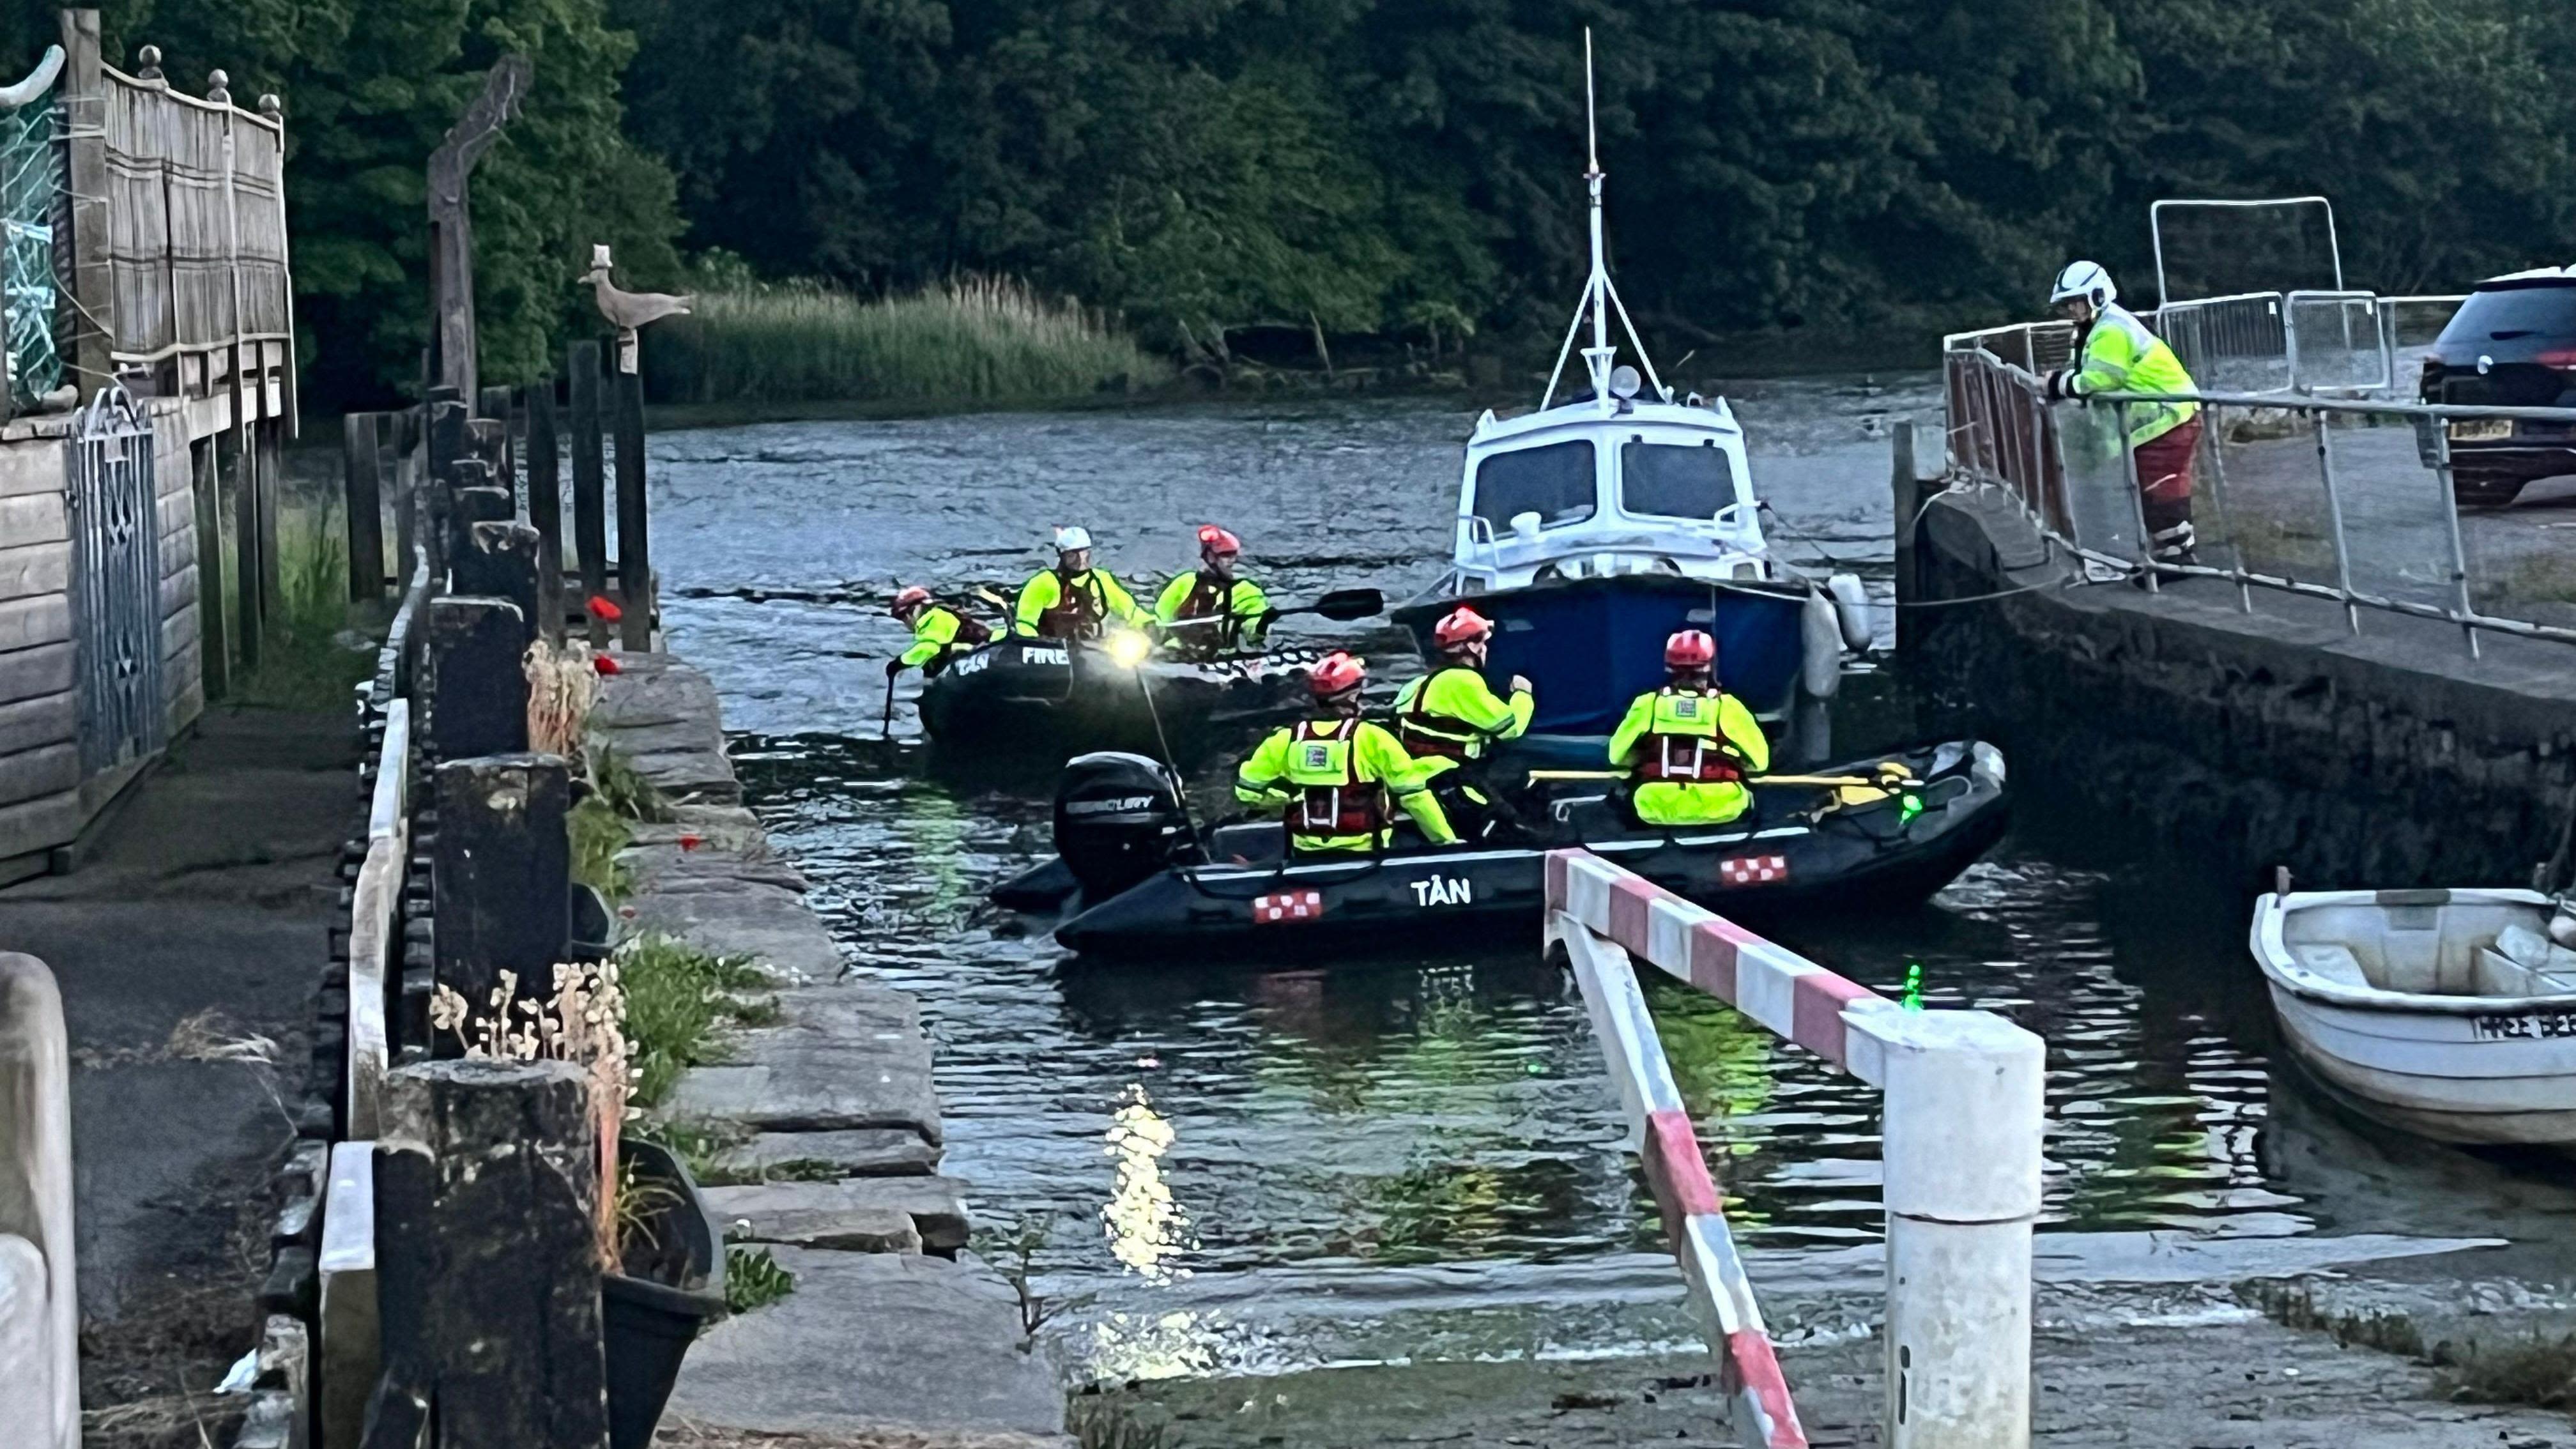 Casualty recovered in search for missing canoeist